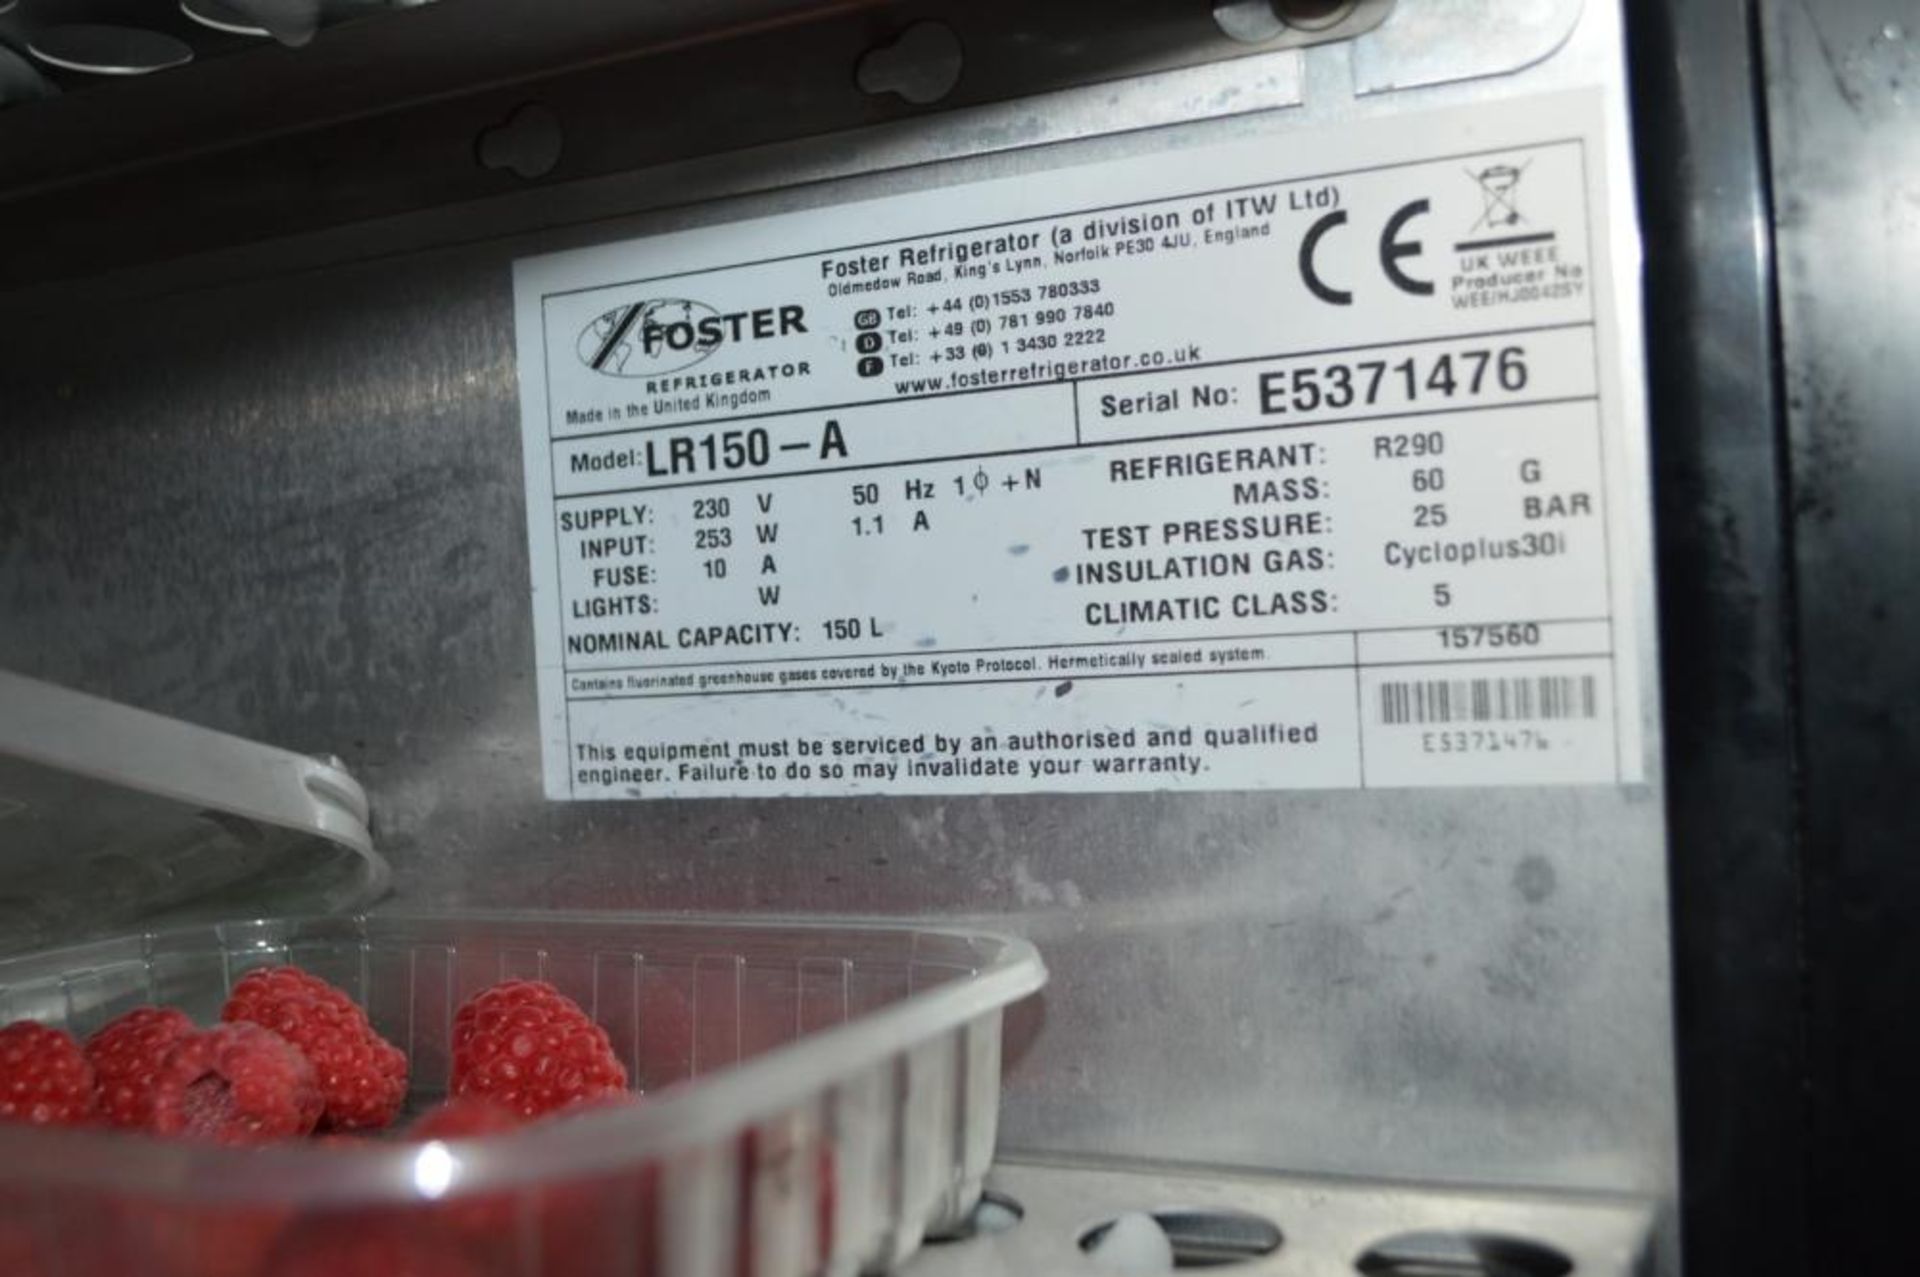 1 x Foster Undercounter Single Door Freezer With Stainless Steel Finish - Model LR150-A - H80 x - Image 2 of 4